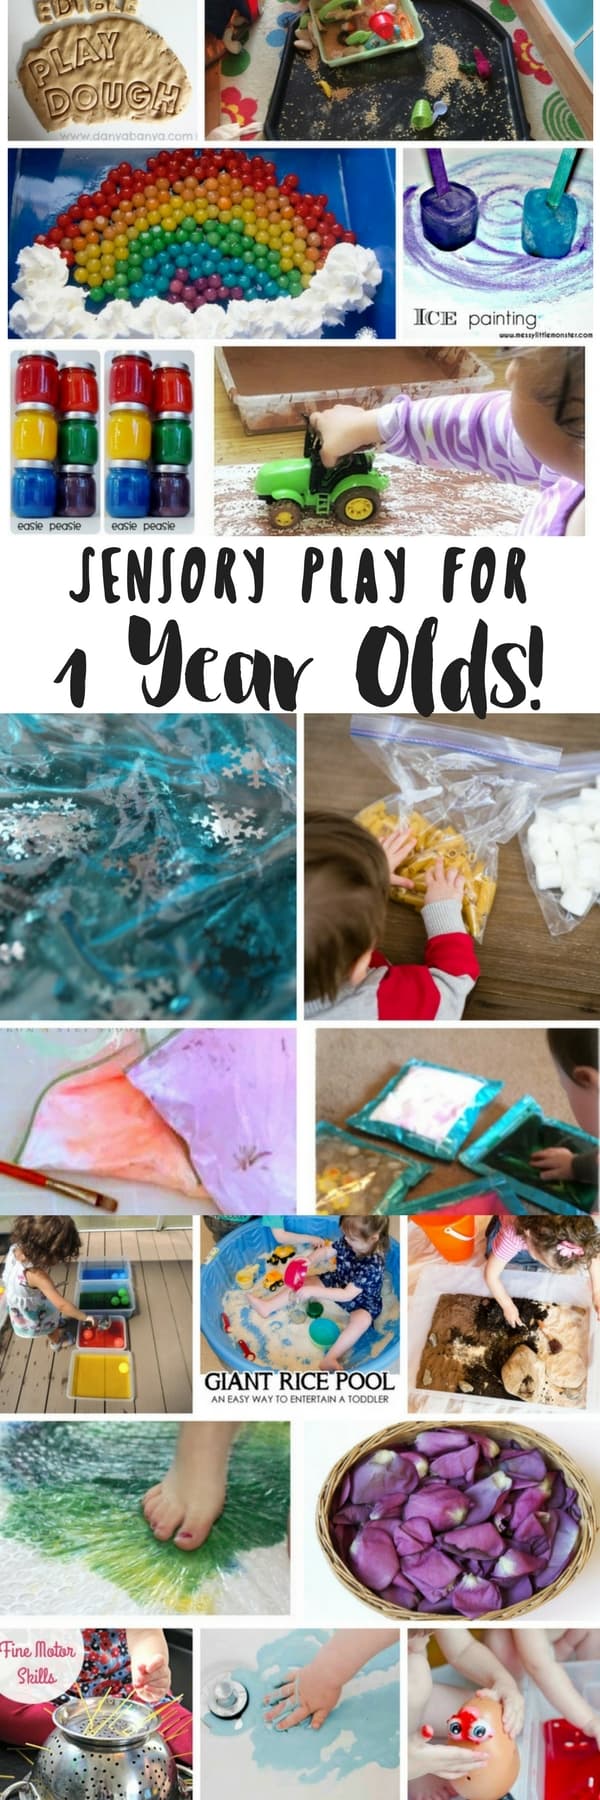 Tons of sensory activities for 1 year olds including sensory bags, sensory bottles, sensory bins, edible sensory play and more! 